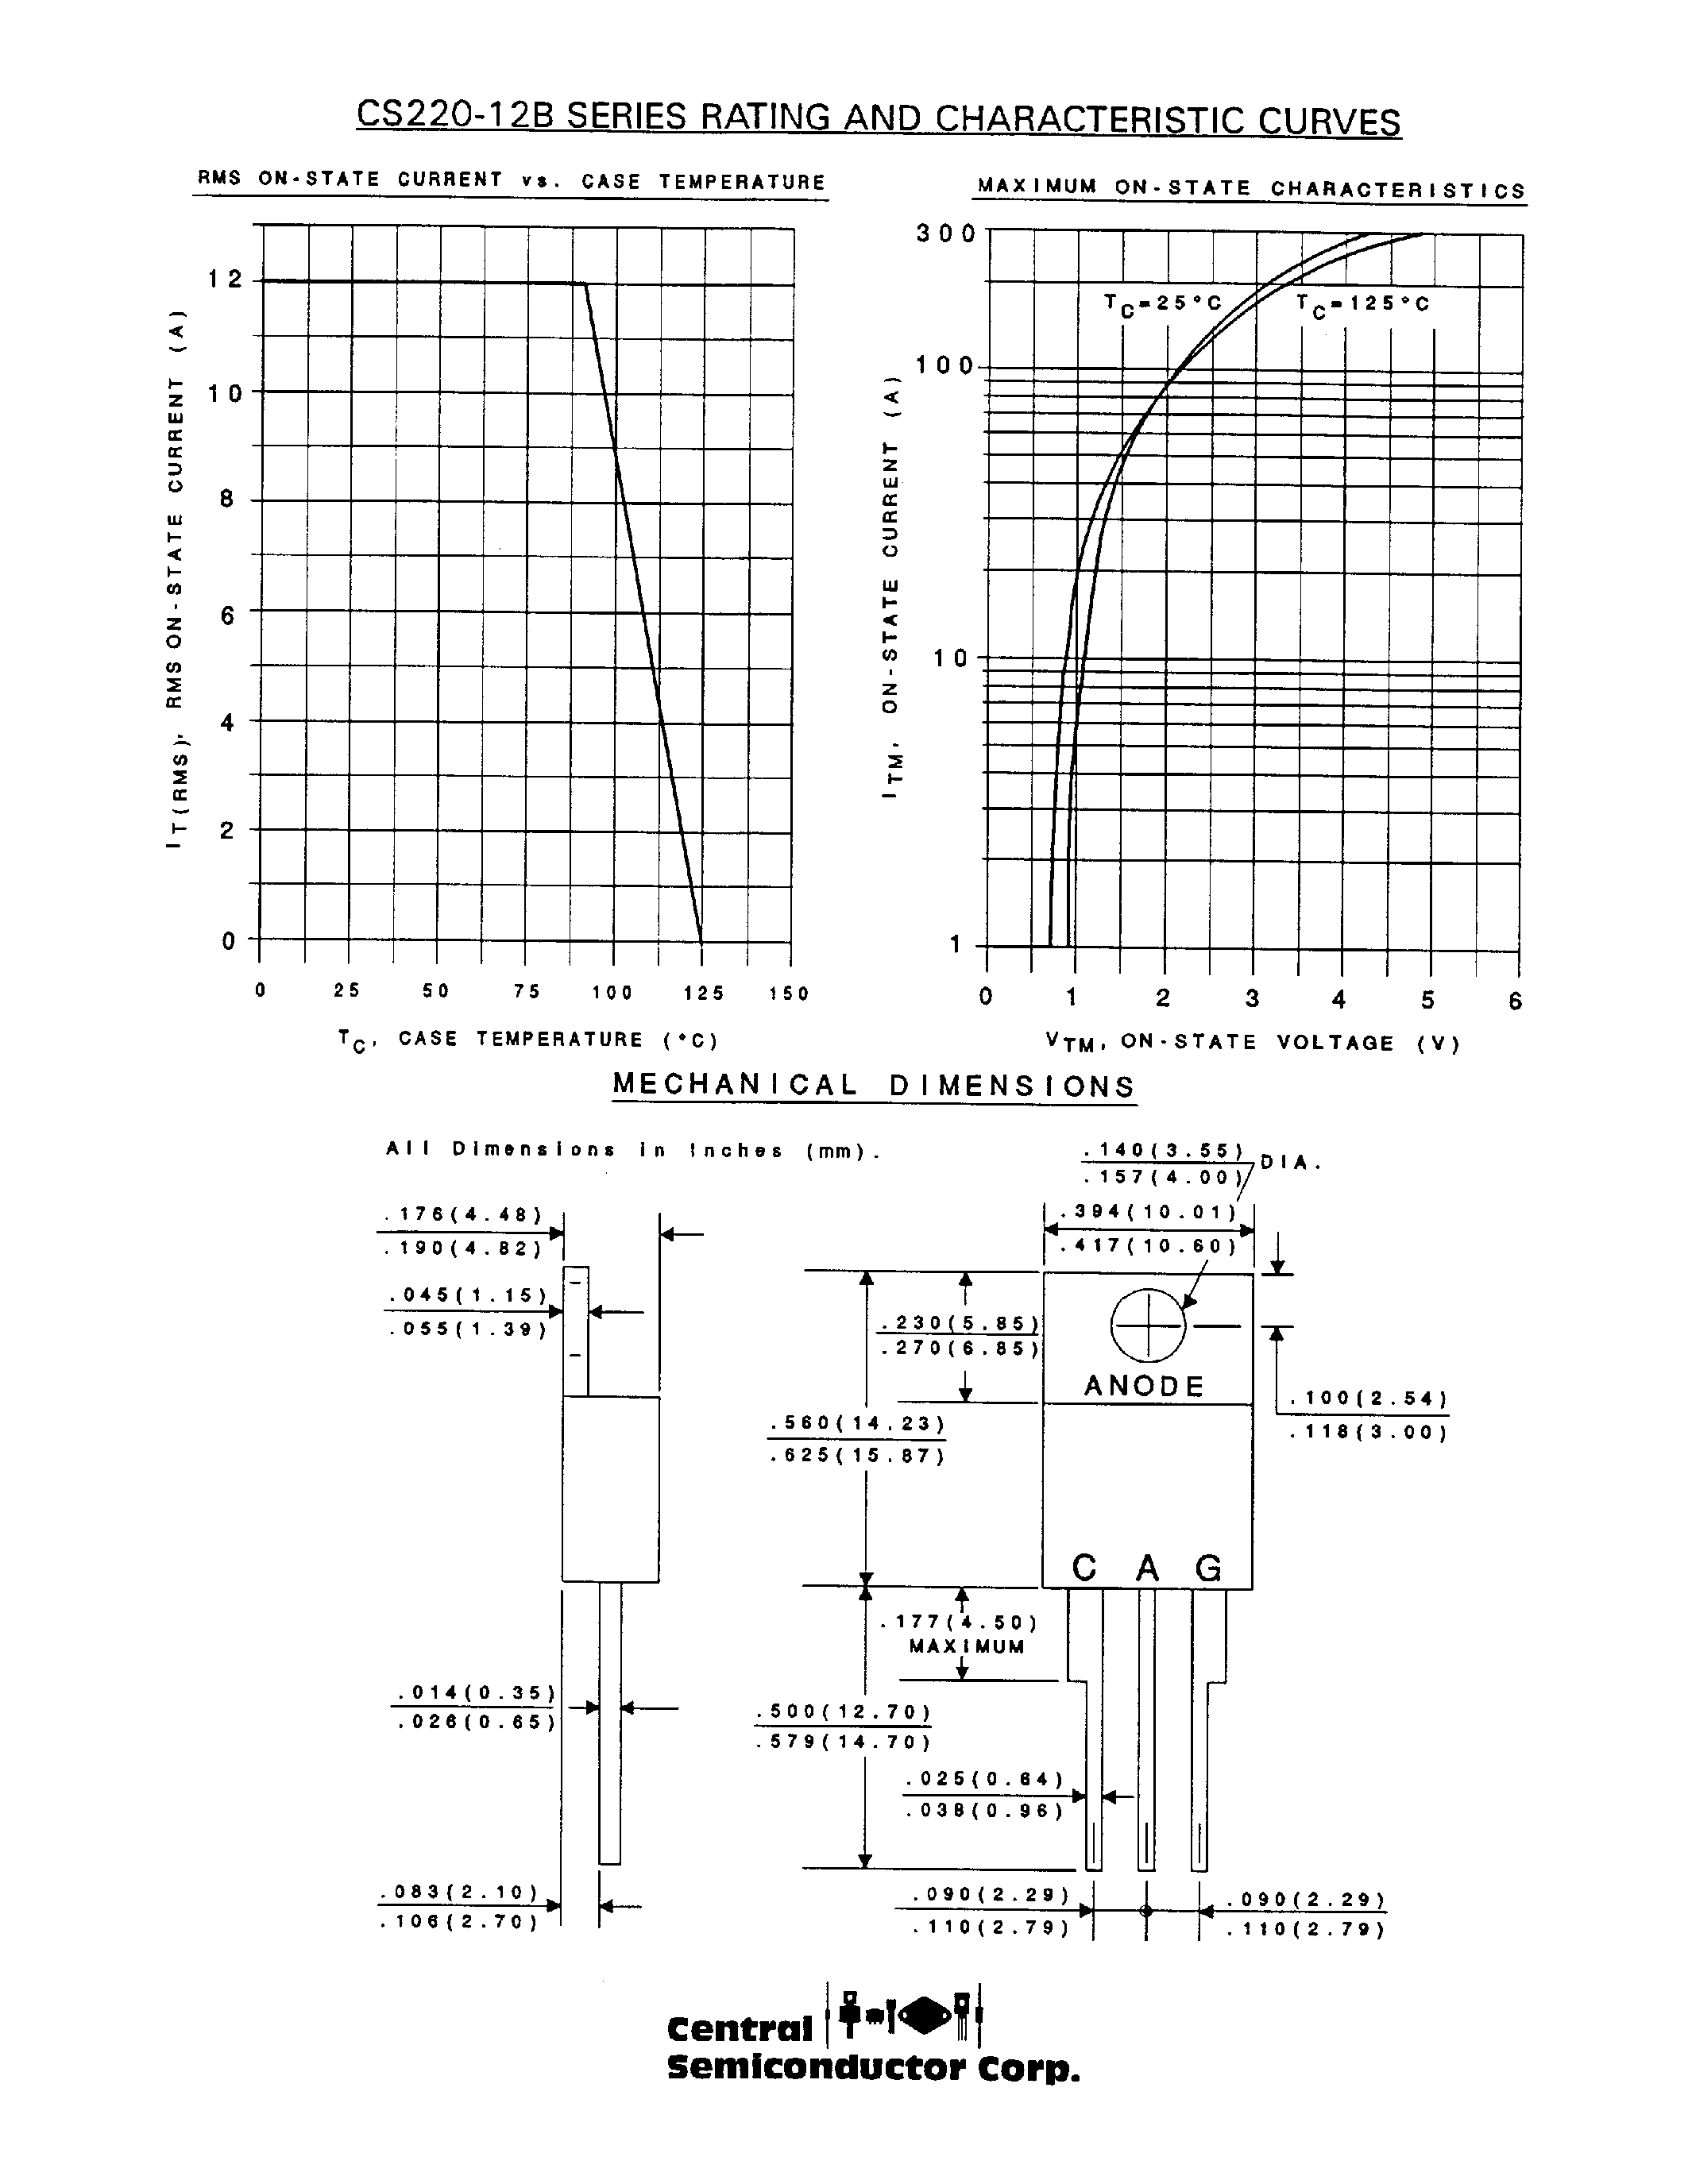 Datasheet CS220-12B - SILICON CONTROLLED RECTIFIER 12 AMP/ 200 THRU 1000 VOLTS page 2